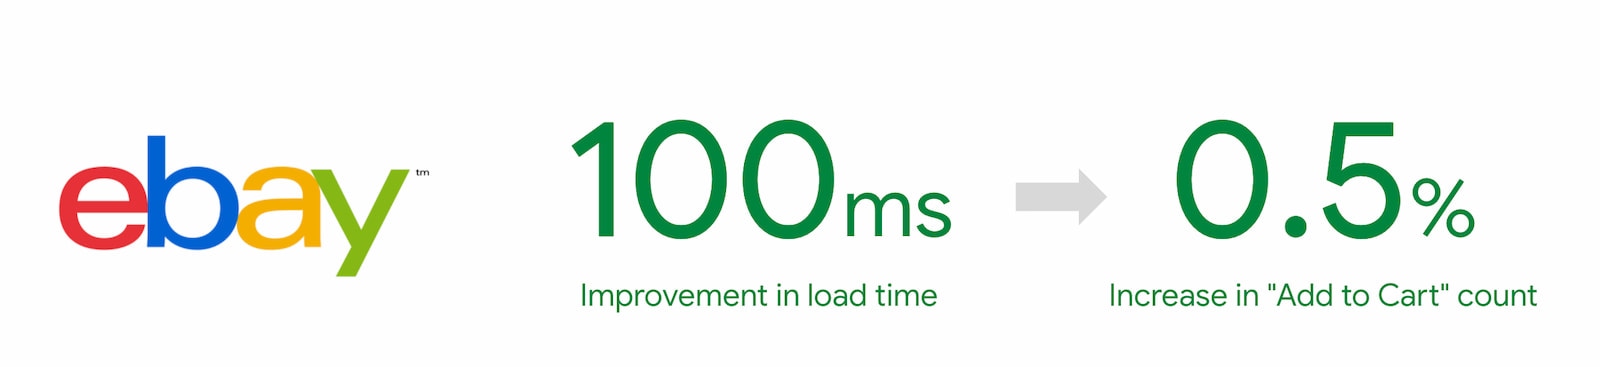 A 100ms improvement in load time resulted in a 0.5% increase in add to cart count for eBay.